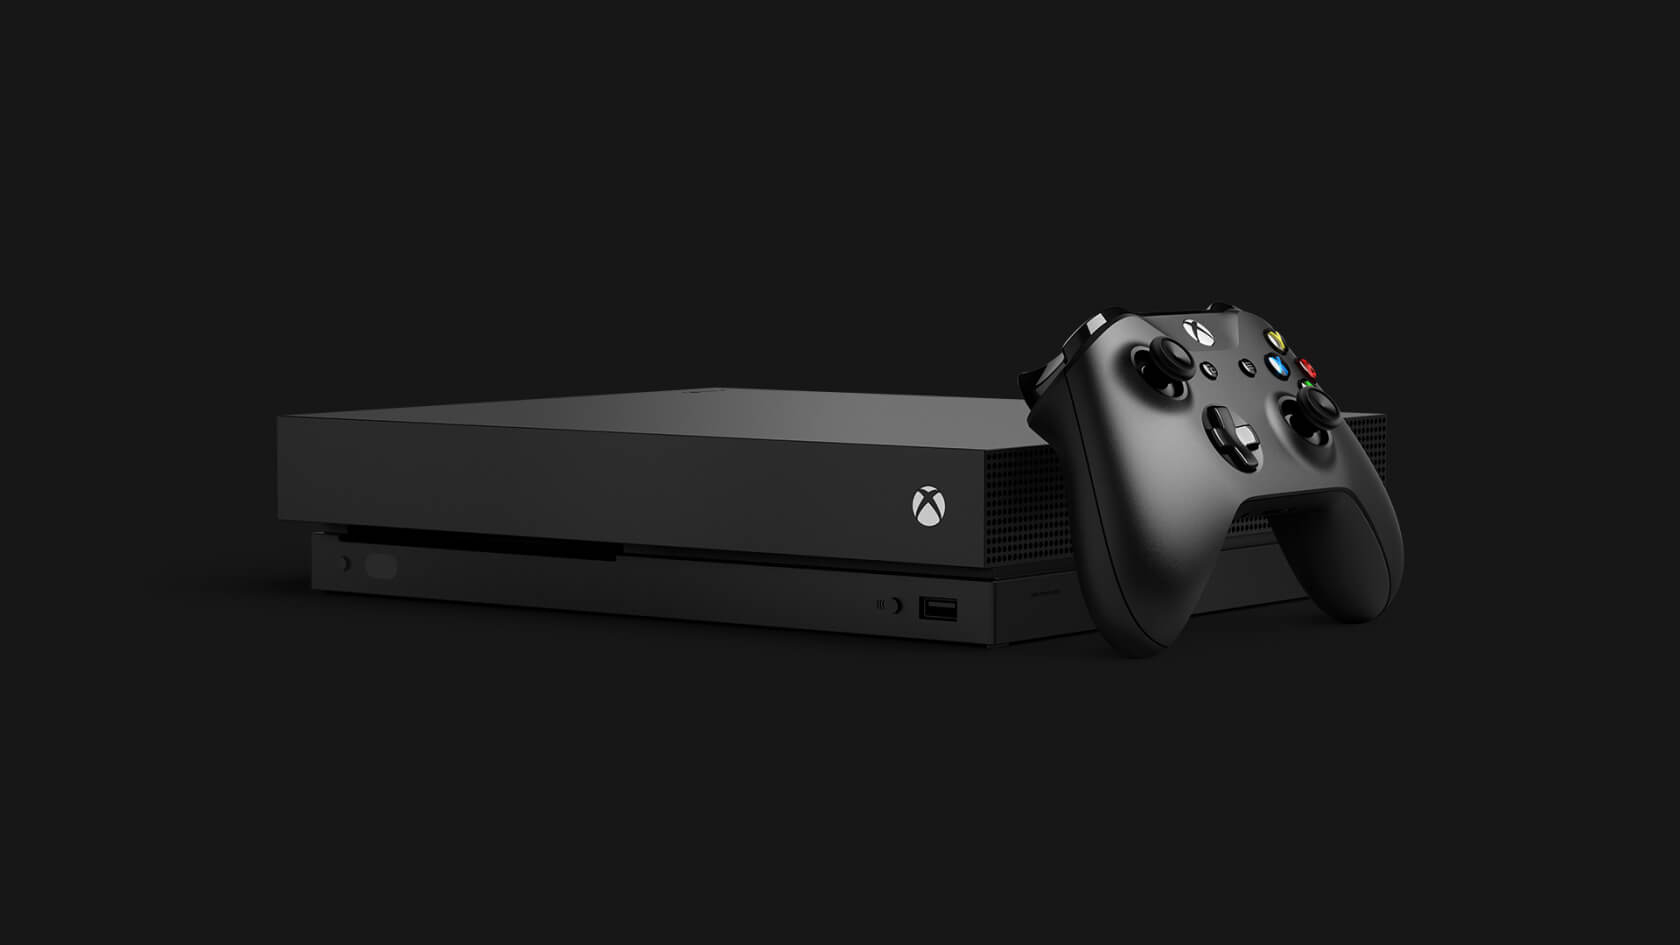 Microsoft reportedly pauses development on Xbox VR headset until tech improves